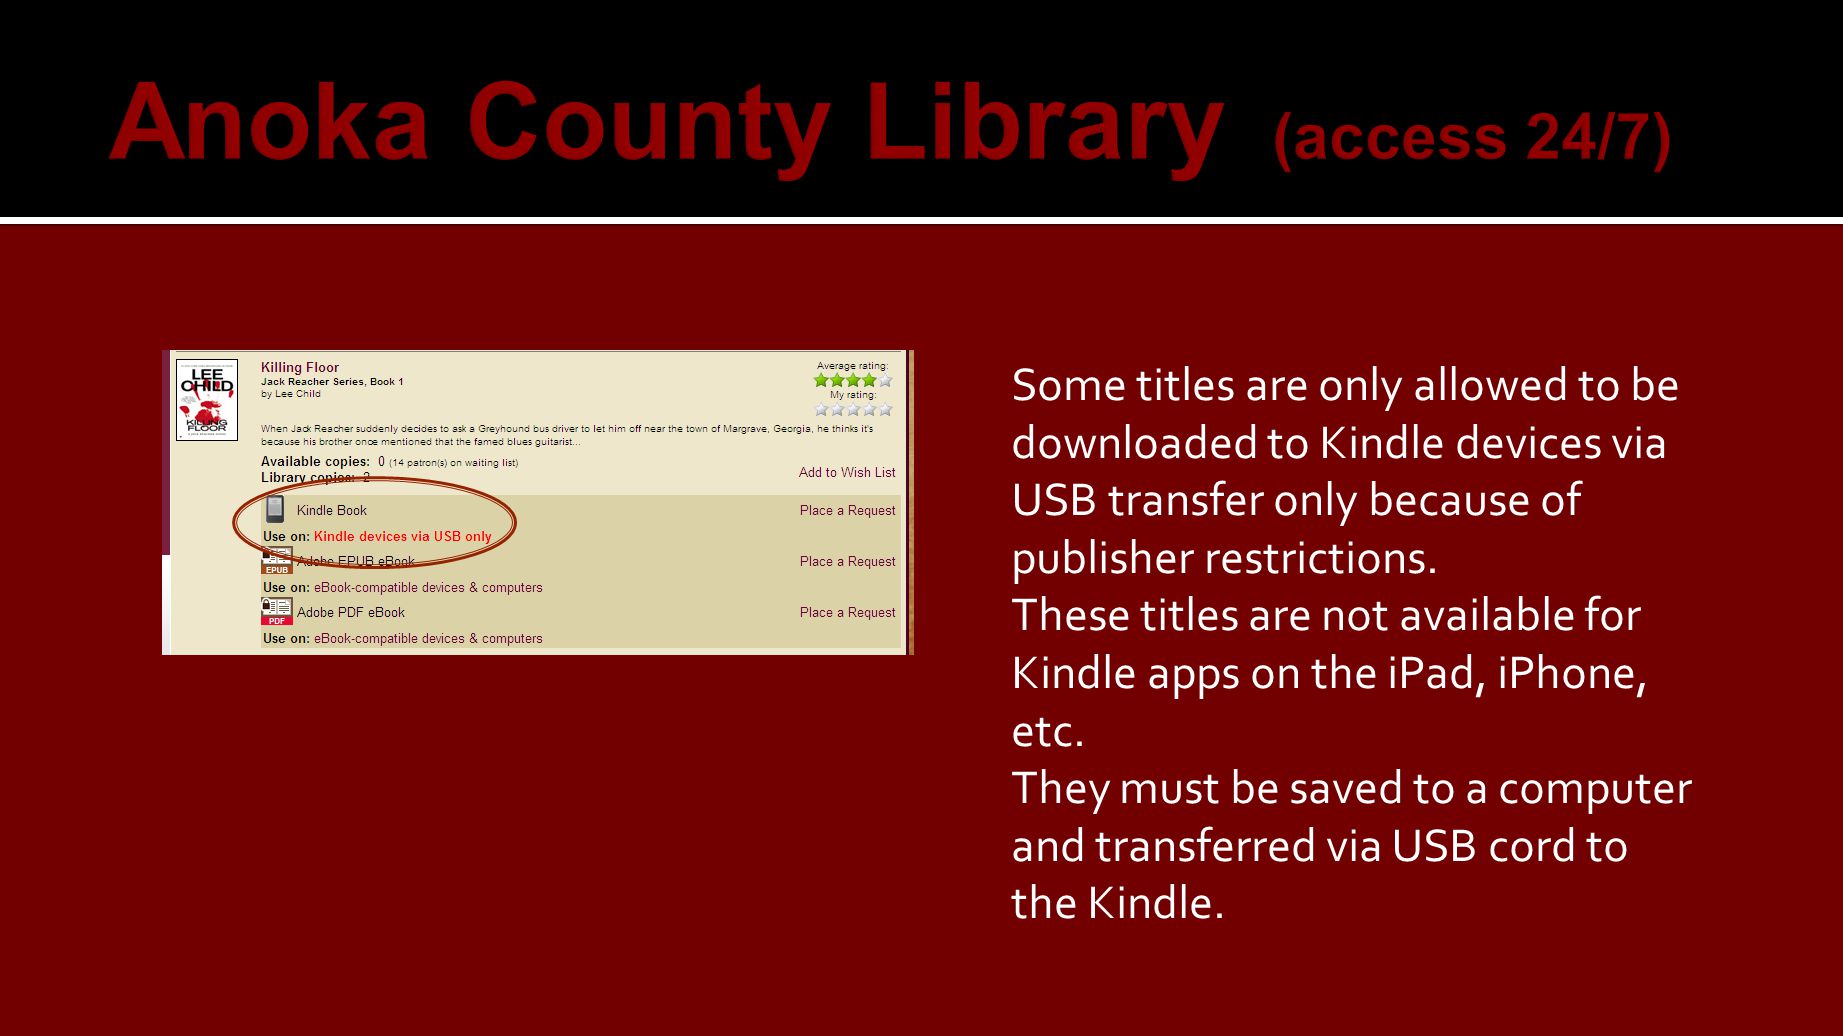 Some titles are only allowed to be downloaded to Kindle devices via USB transfer only because of publisher restrictions.